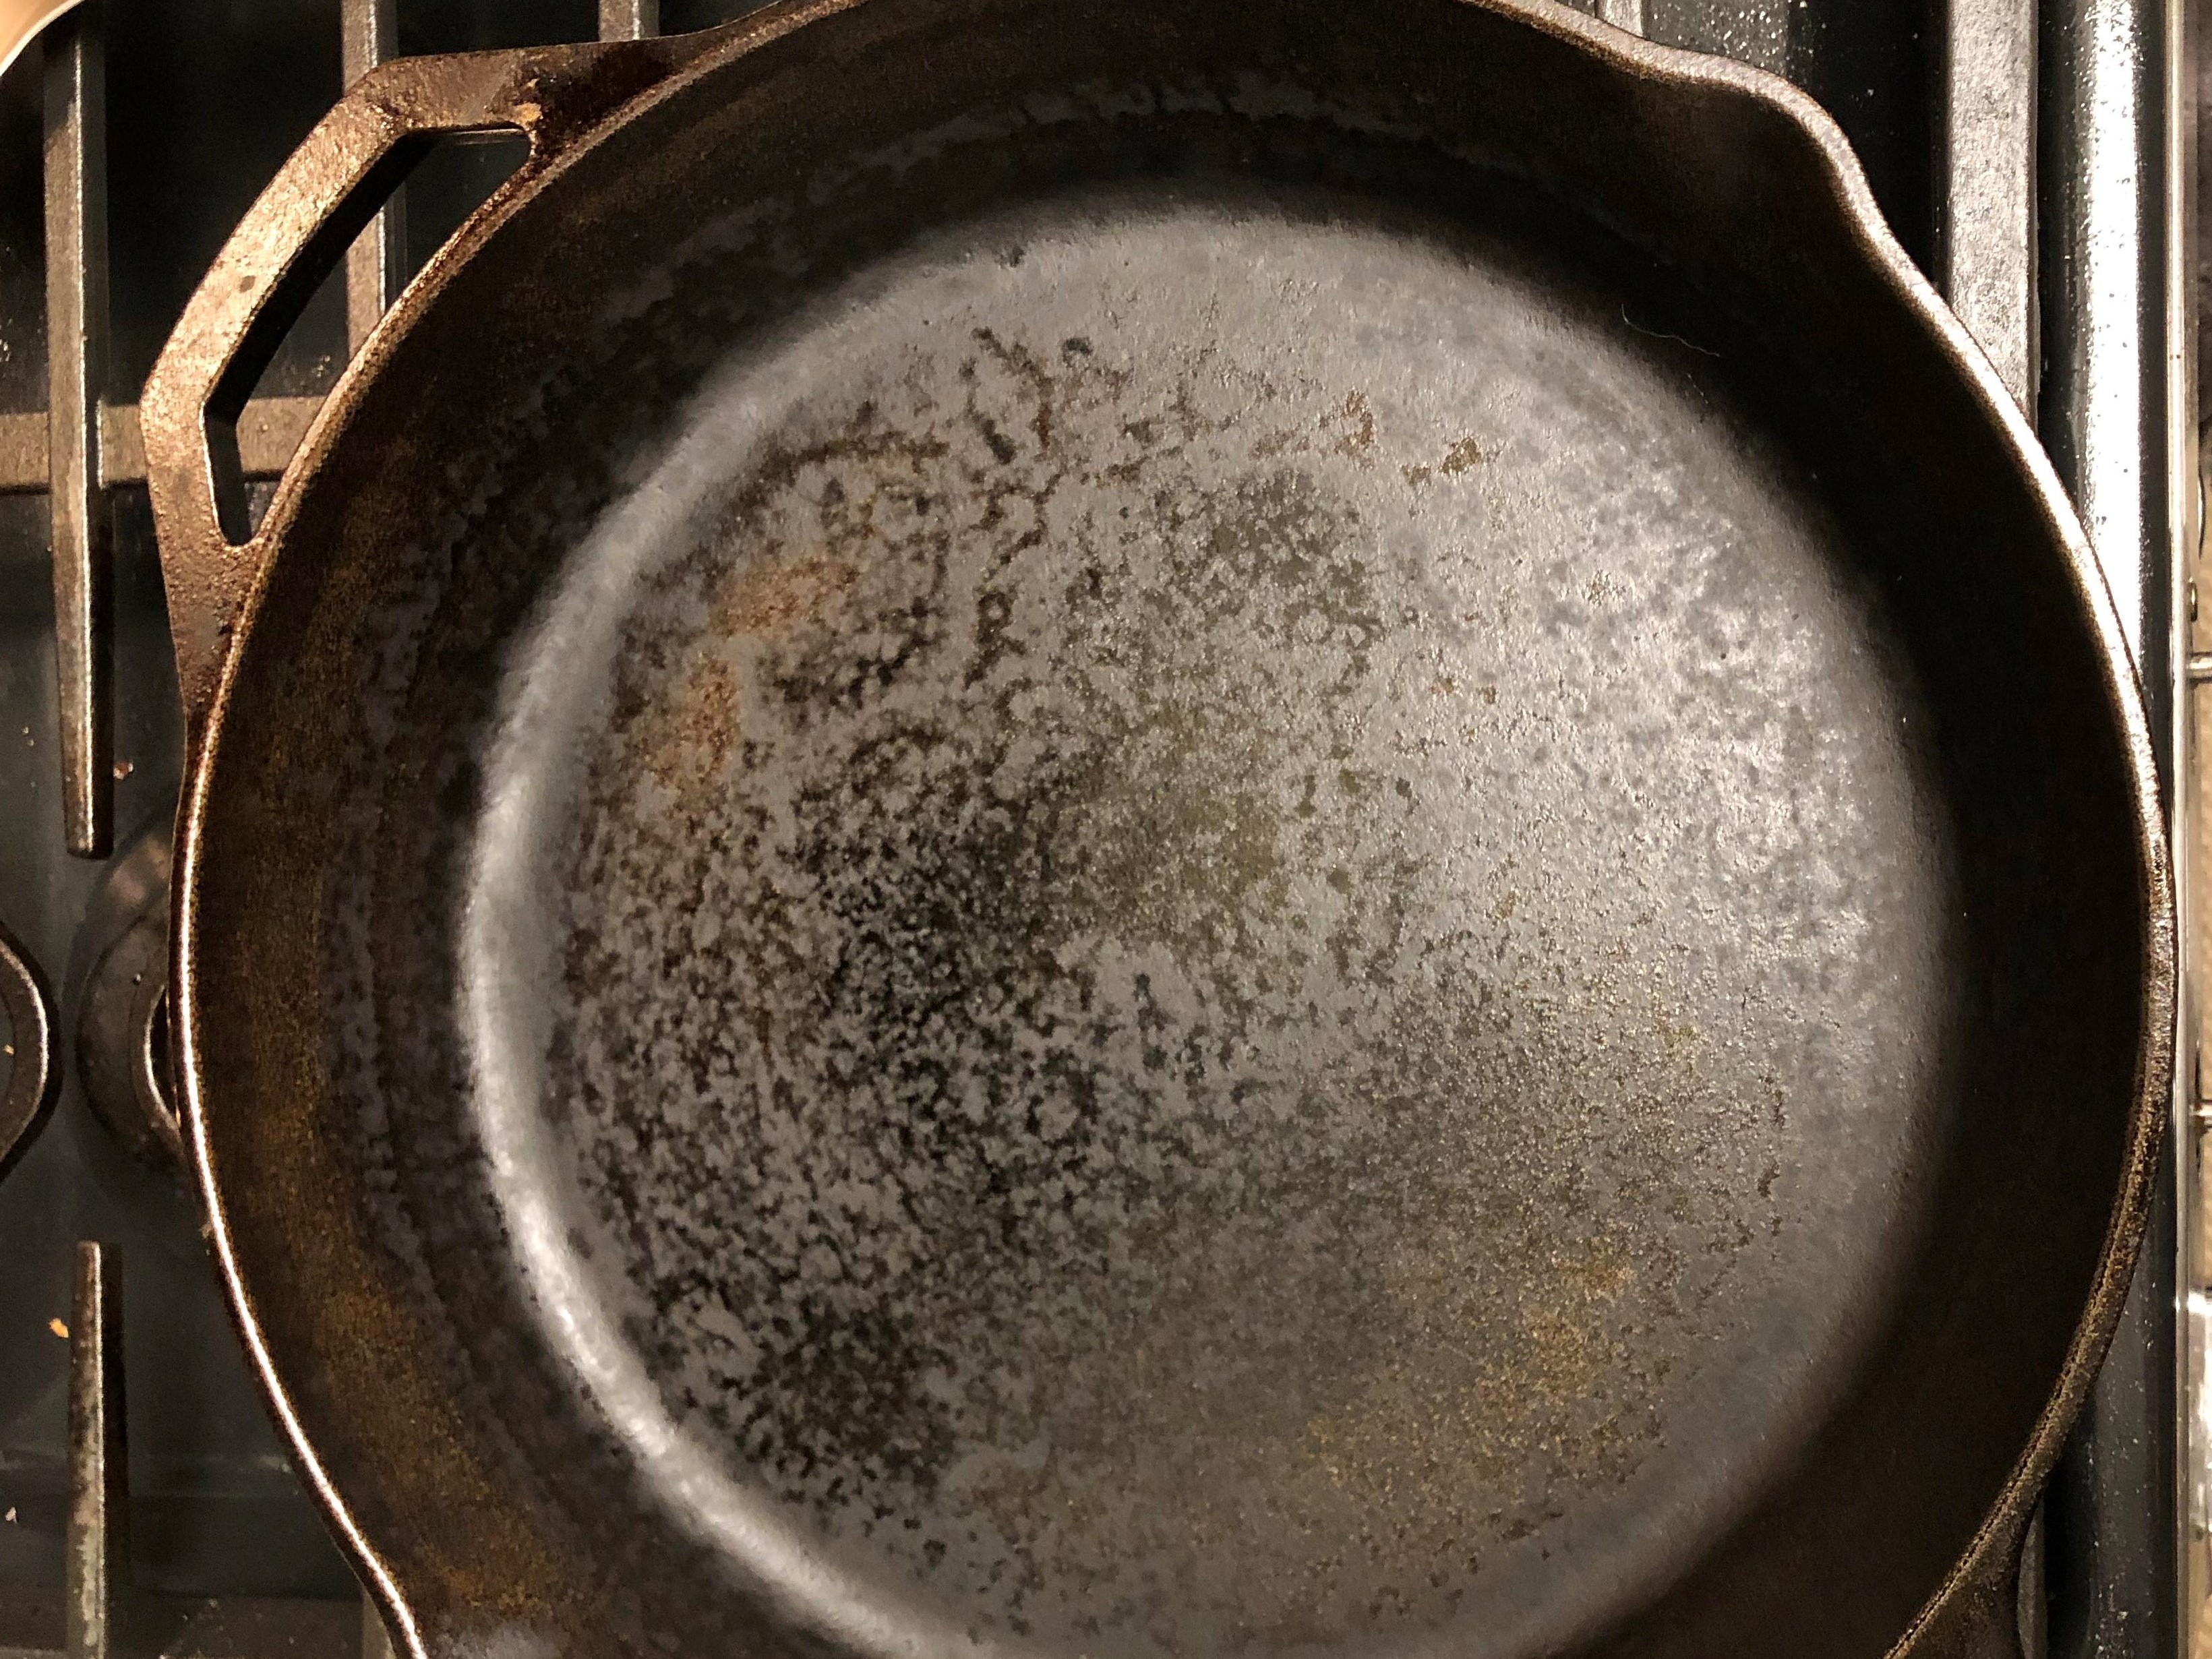 cast iron skillet #2 with uneven, splotchy seasoning